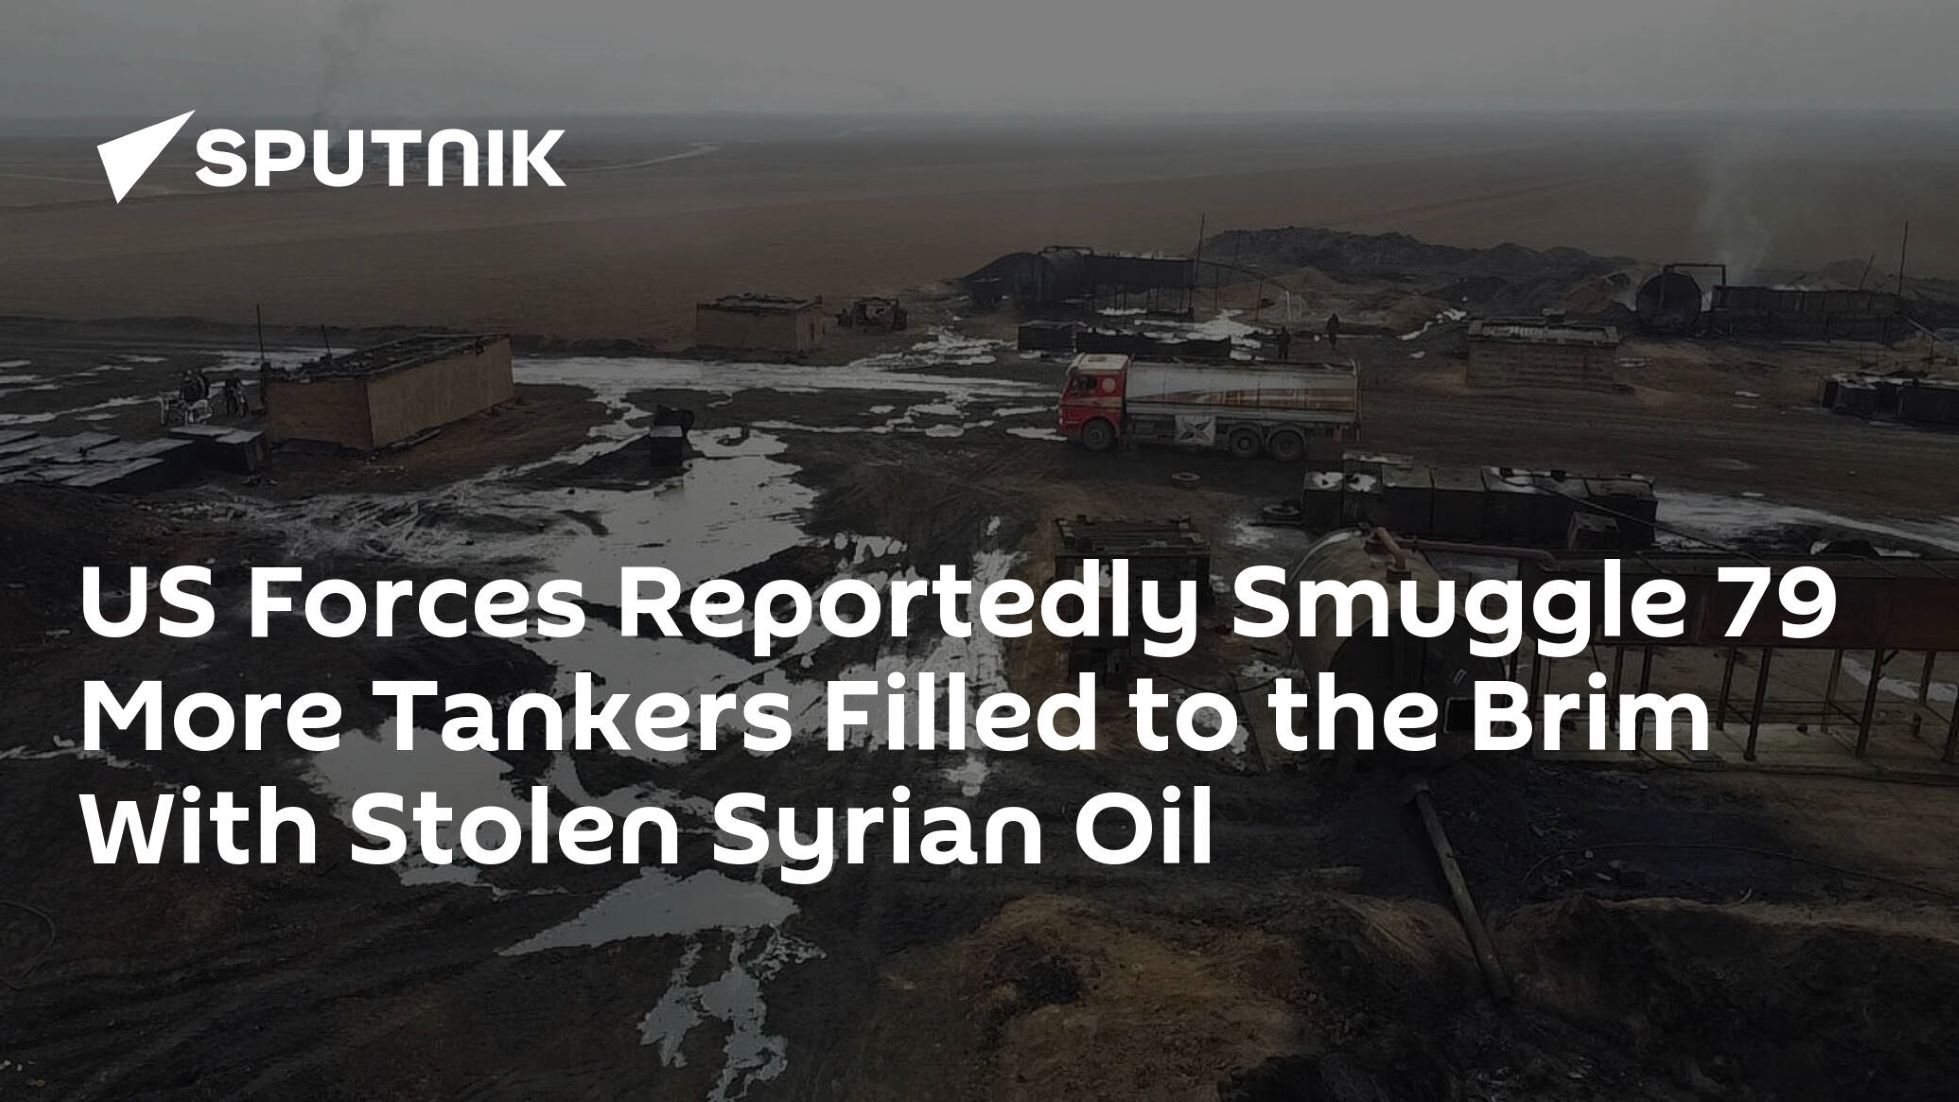 U.S. Forces Smuggle Stolen Syrian Resources Into Iraq